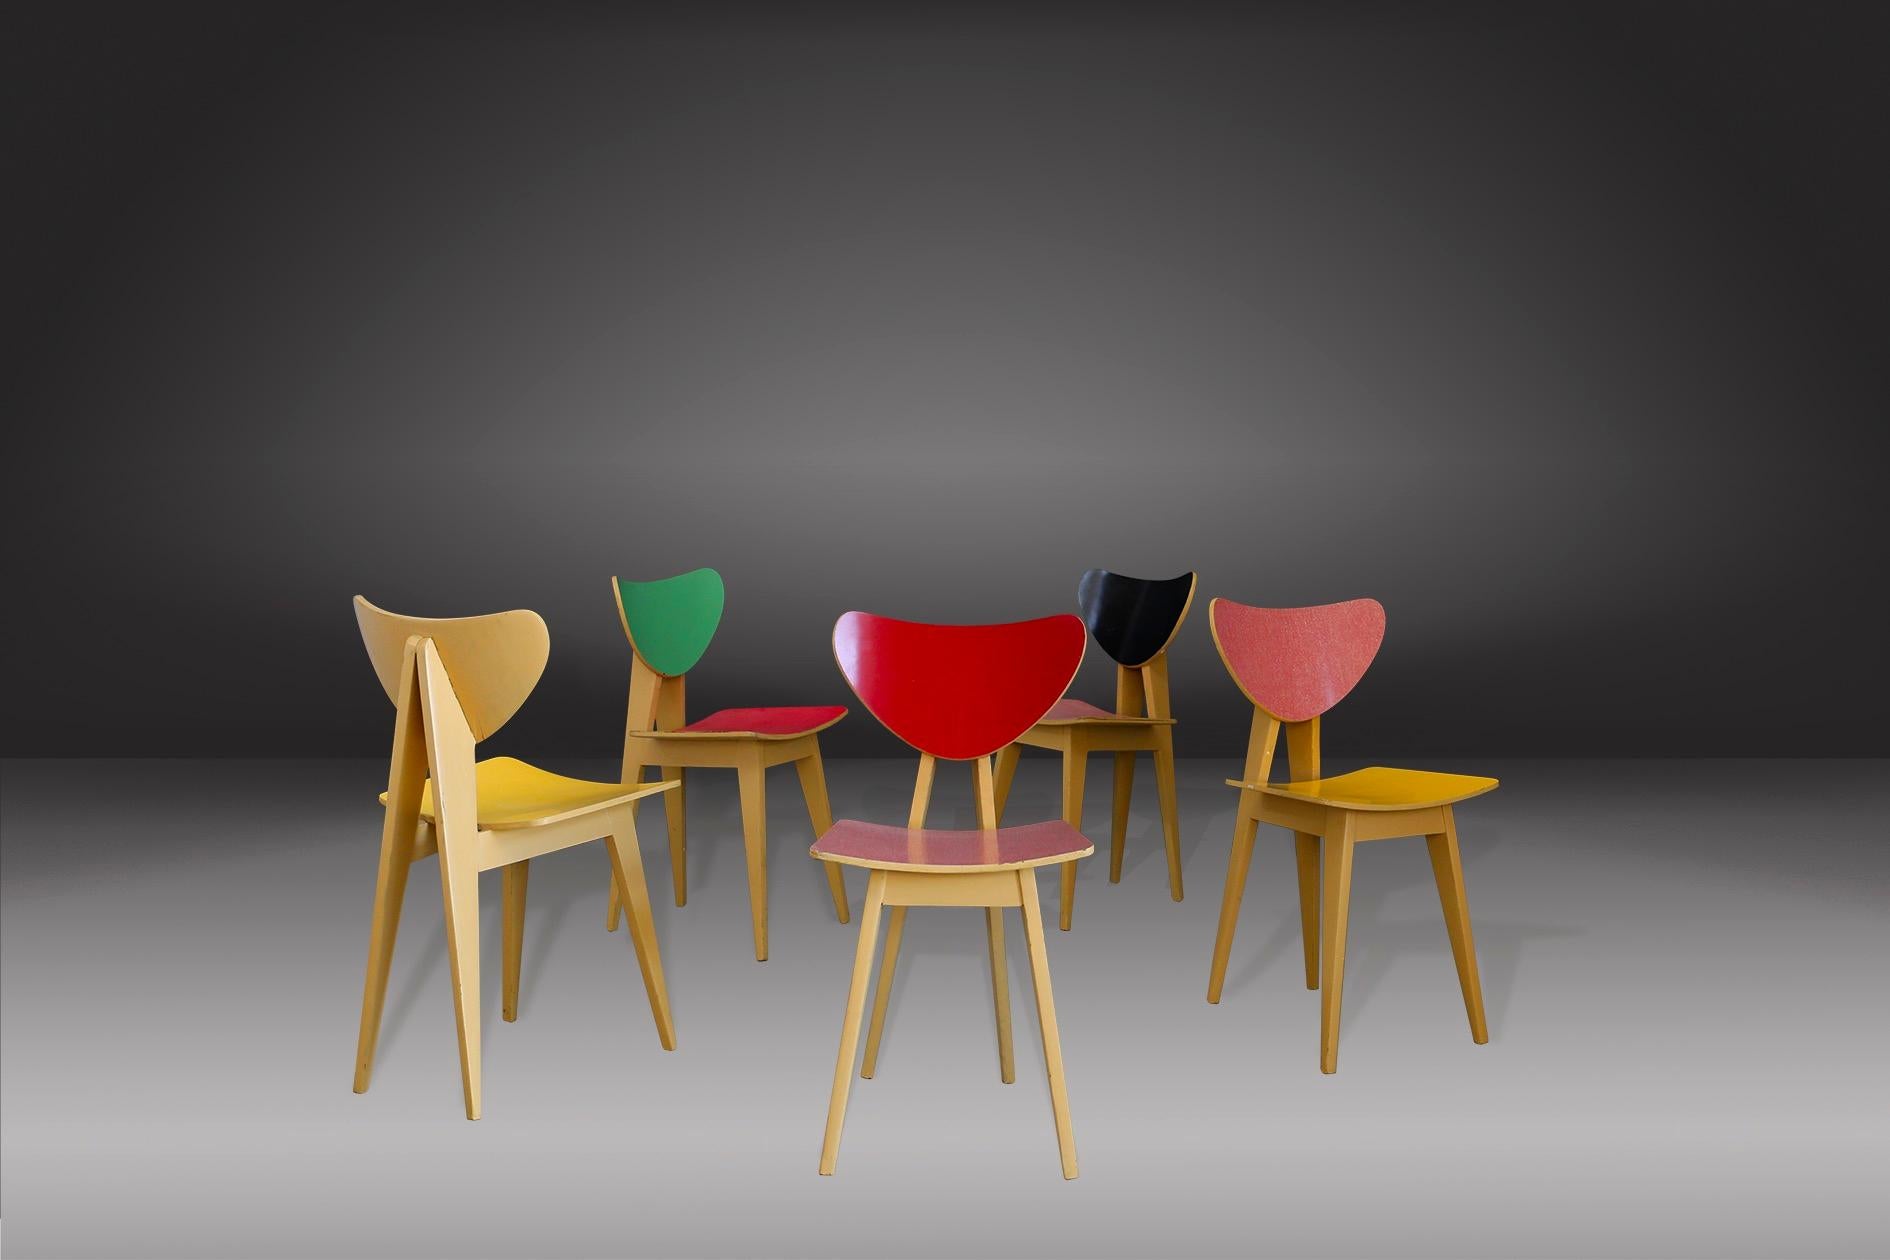 Eccentric coloured ant set from the 1950s. The structure of the set of chairs is made of cream-colored lacquered wood. Their peculiarity, as you can see in the photos, each chair is of a different color covered in ant. The condition of the chairs